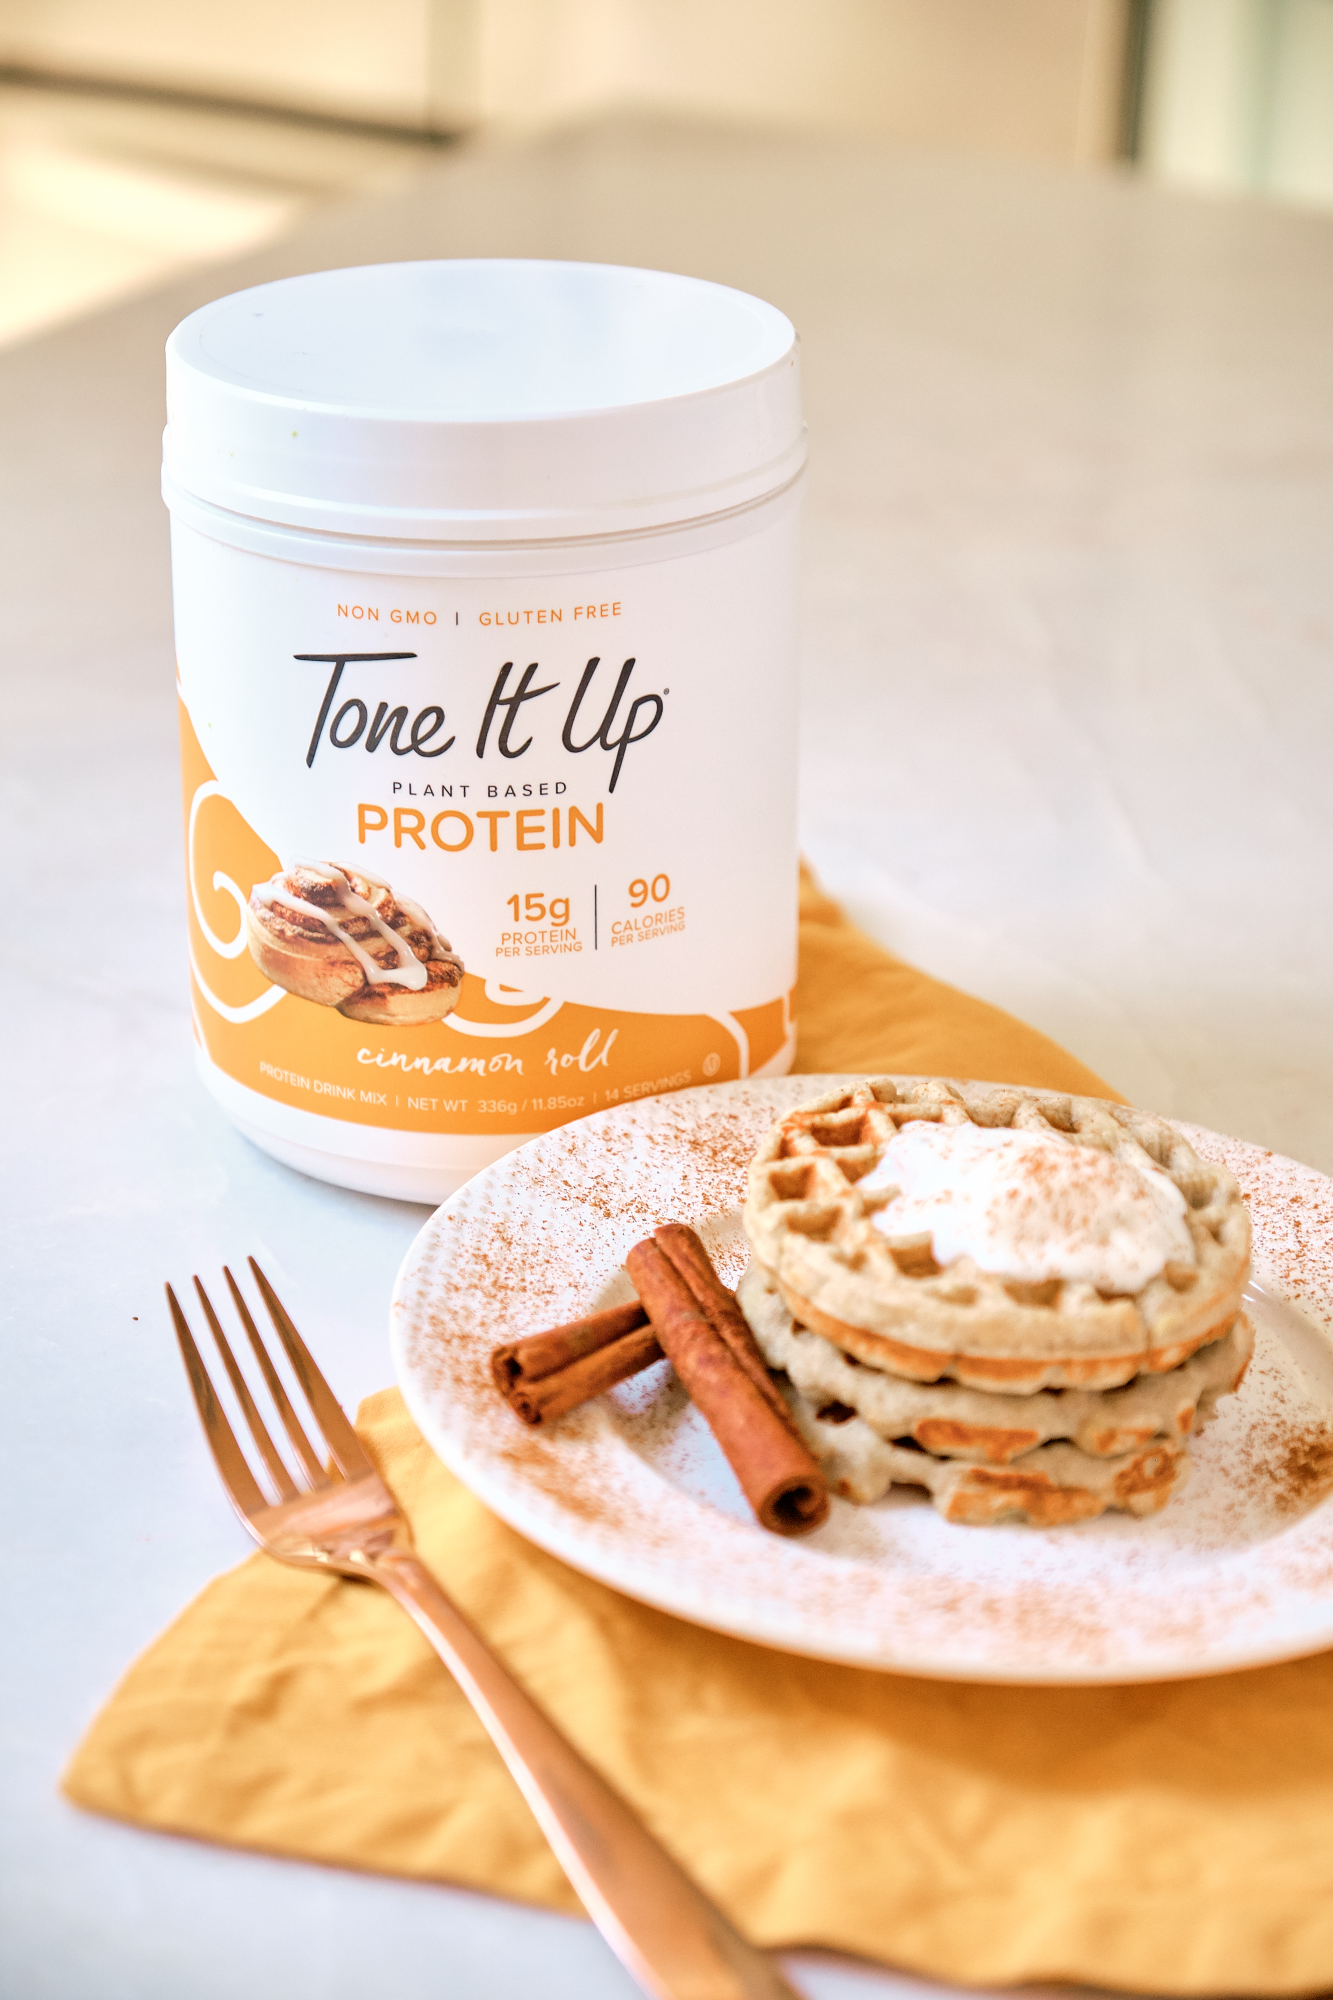 Tone It Up Cinnamon Roll Protein is clean, gluten free, and delicious. Try these easy protein waffles.